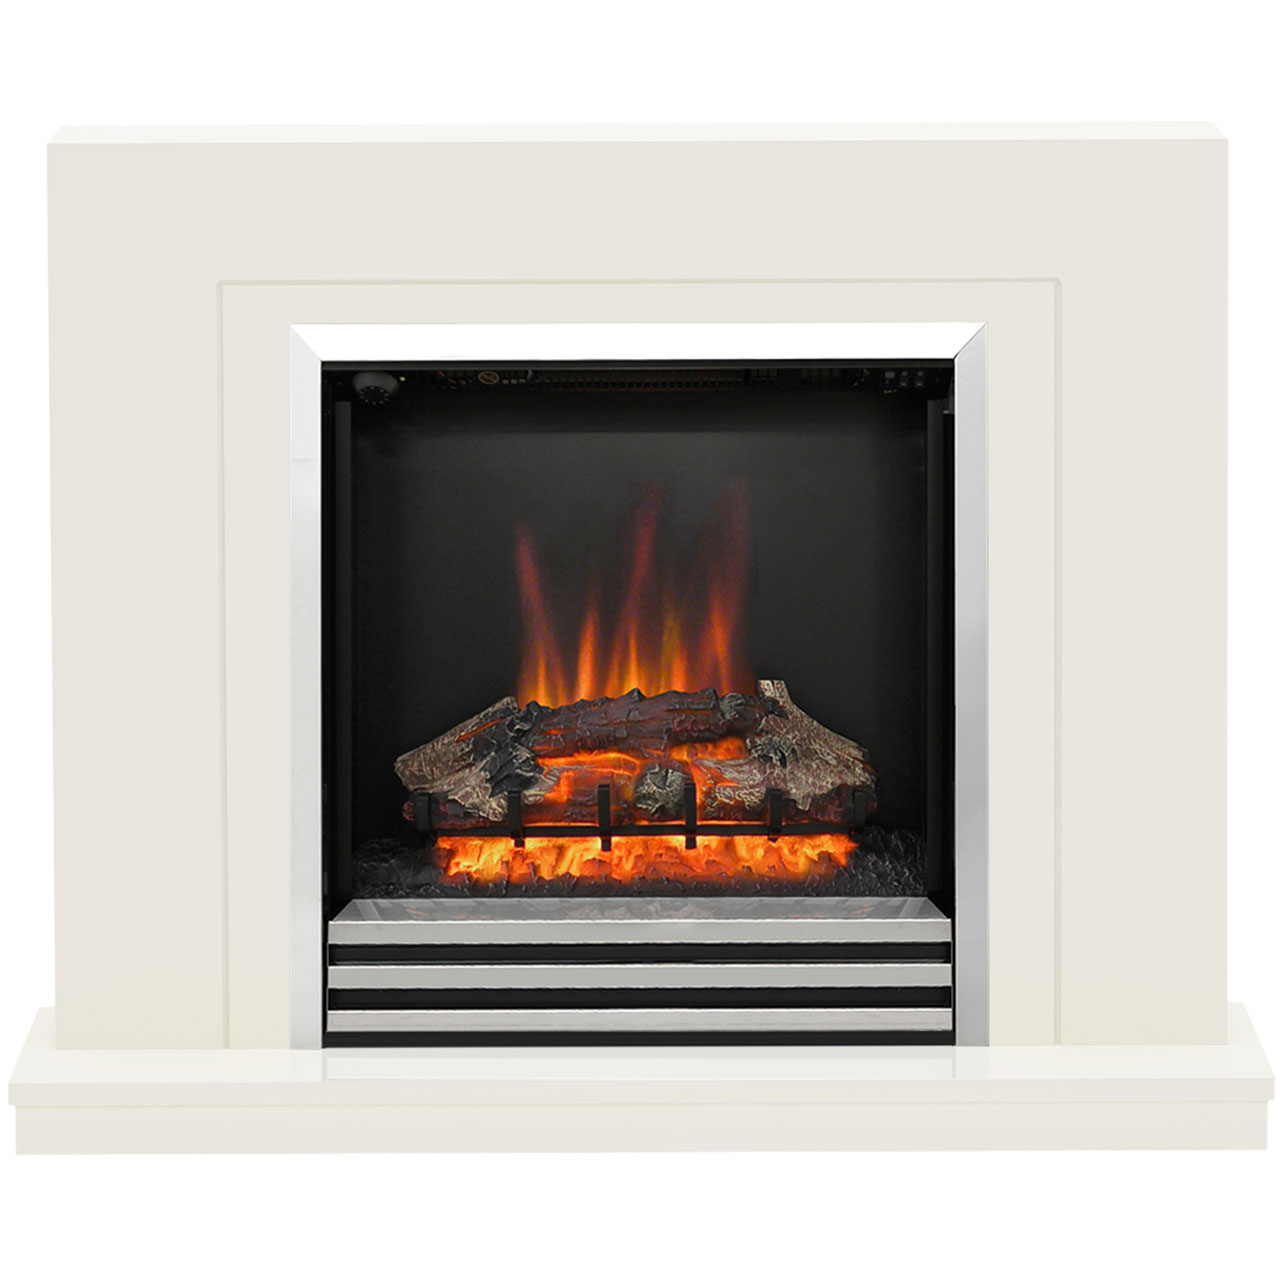 BeModern Colby 5088 Log Effect Suite And Surround Fireplace Review